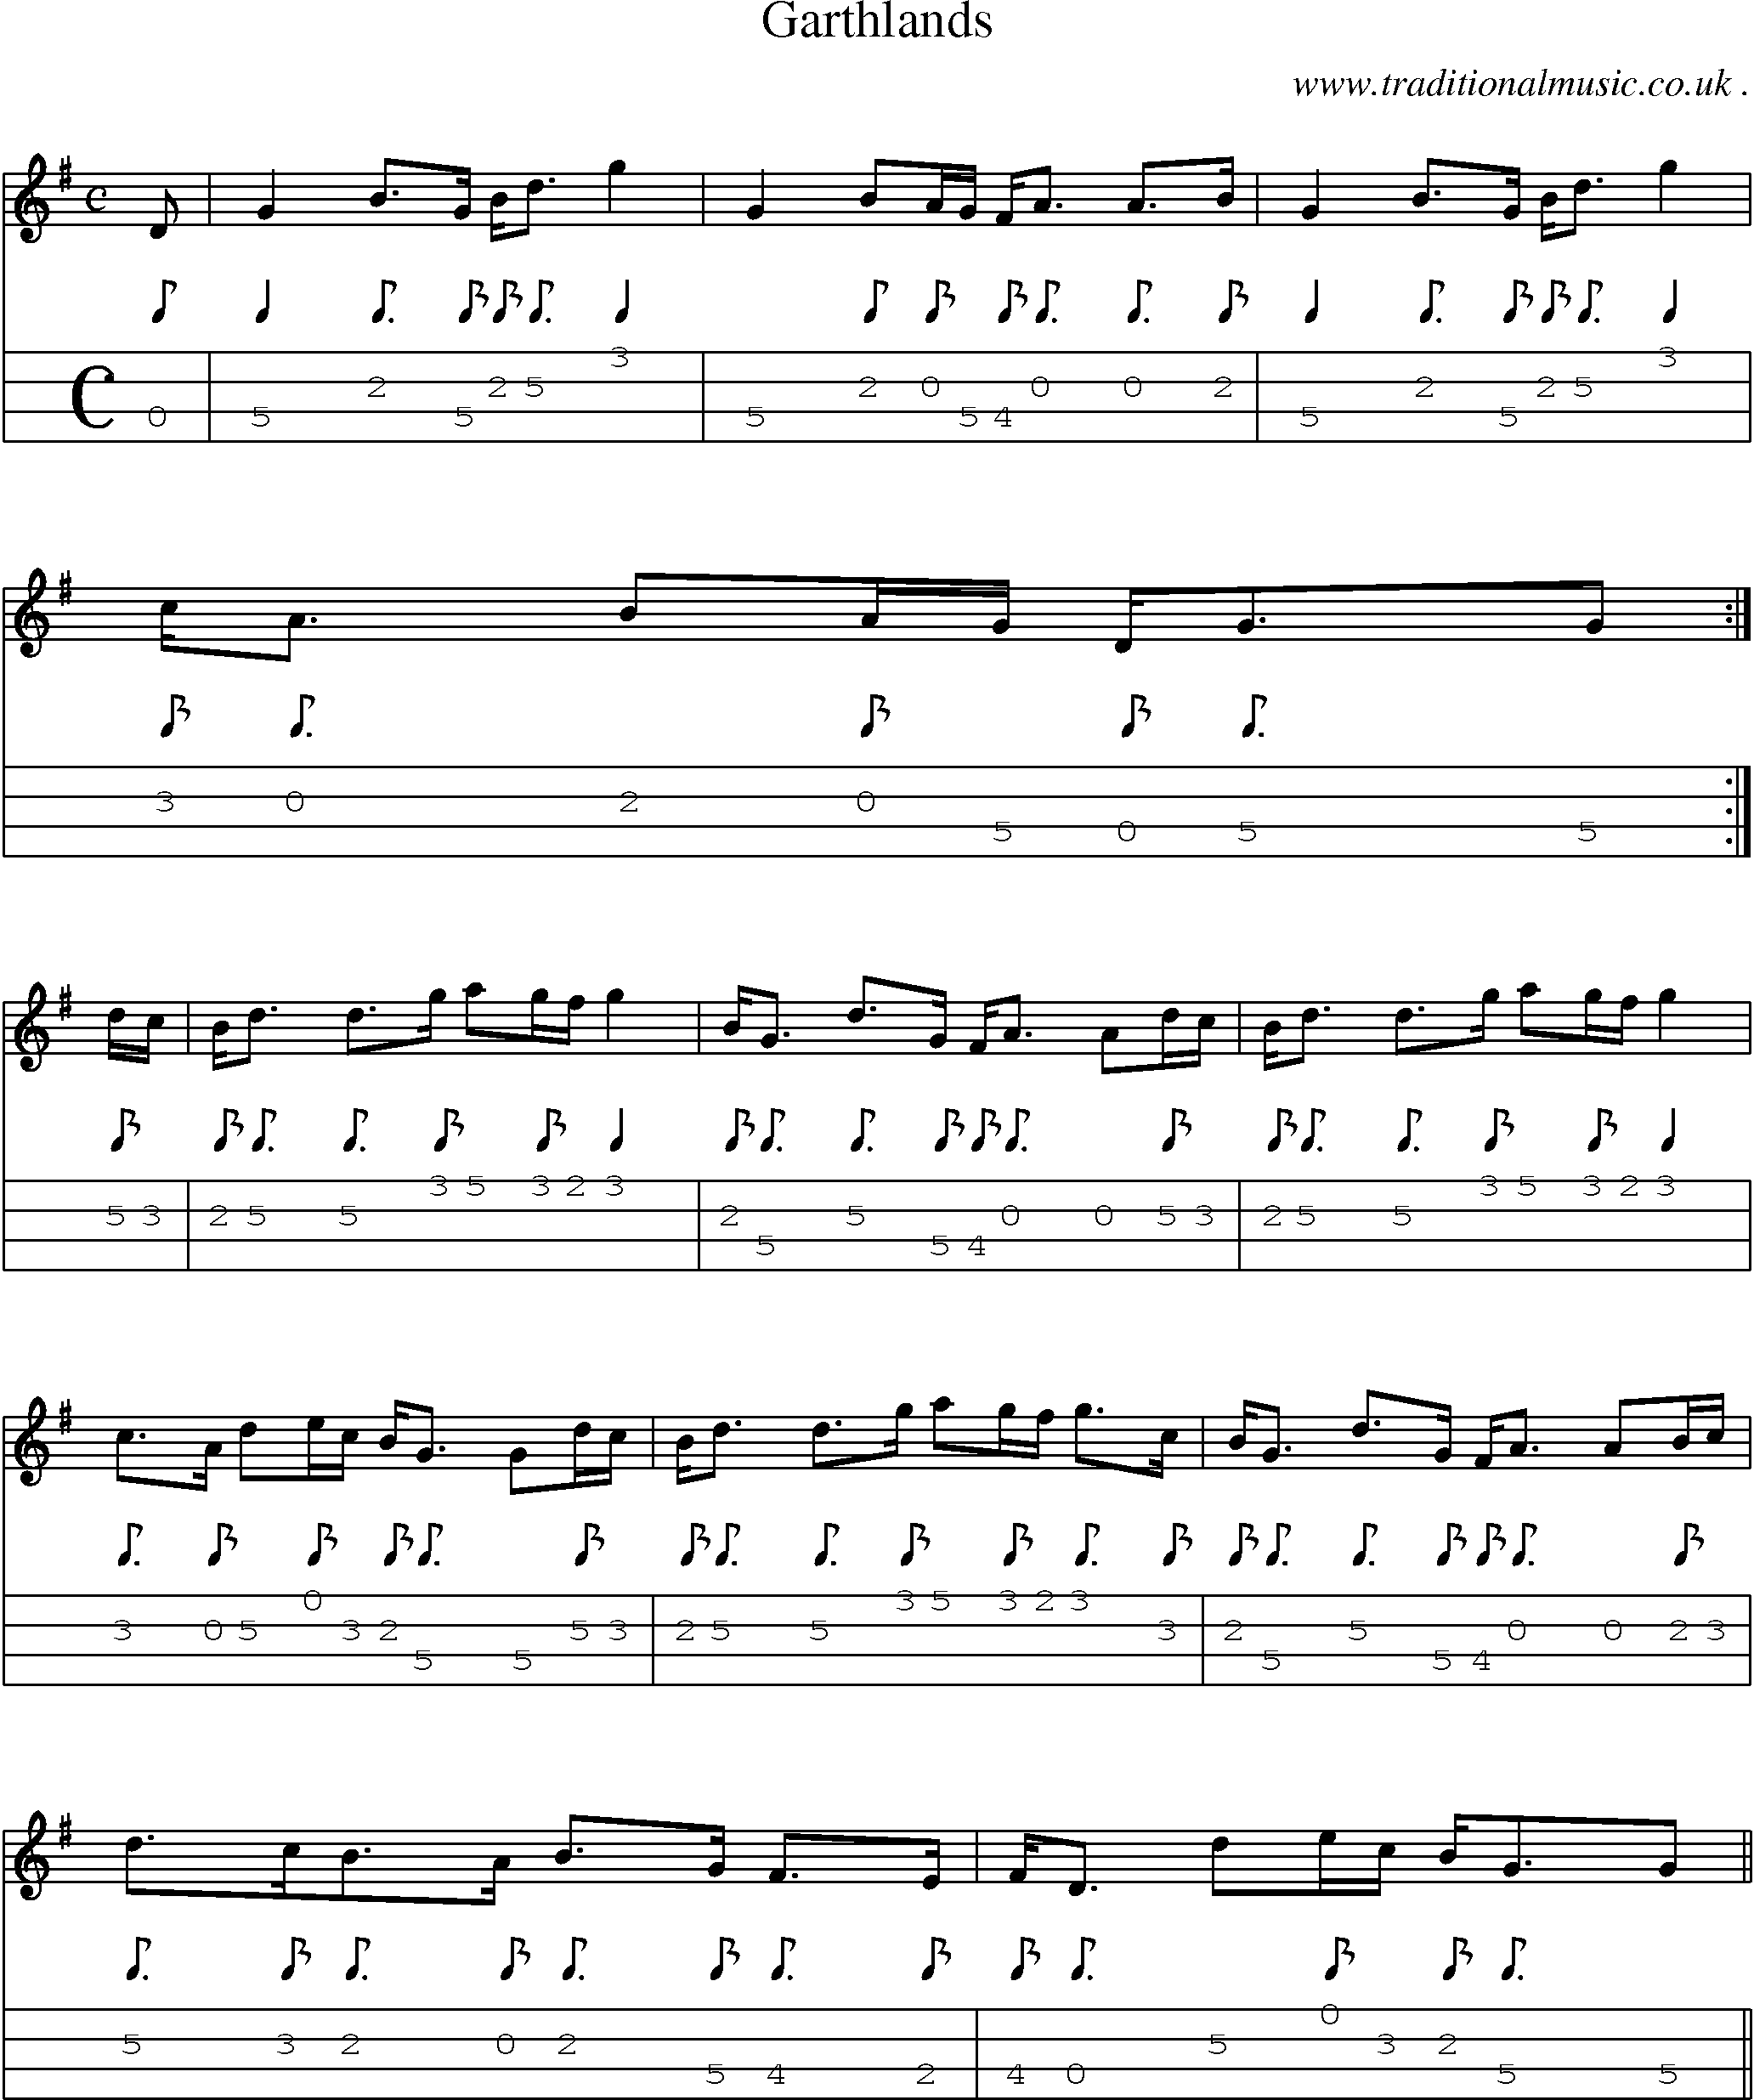 Sheet-music  score, Chords and Mandolin Tabs for Garthlands